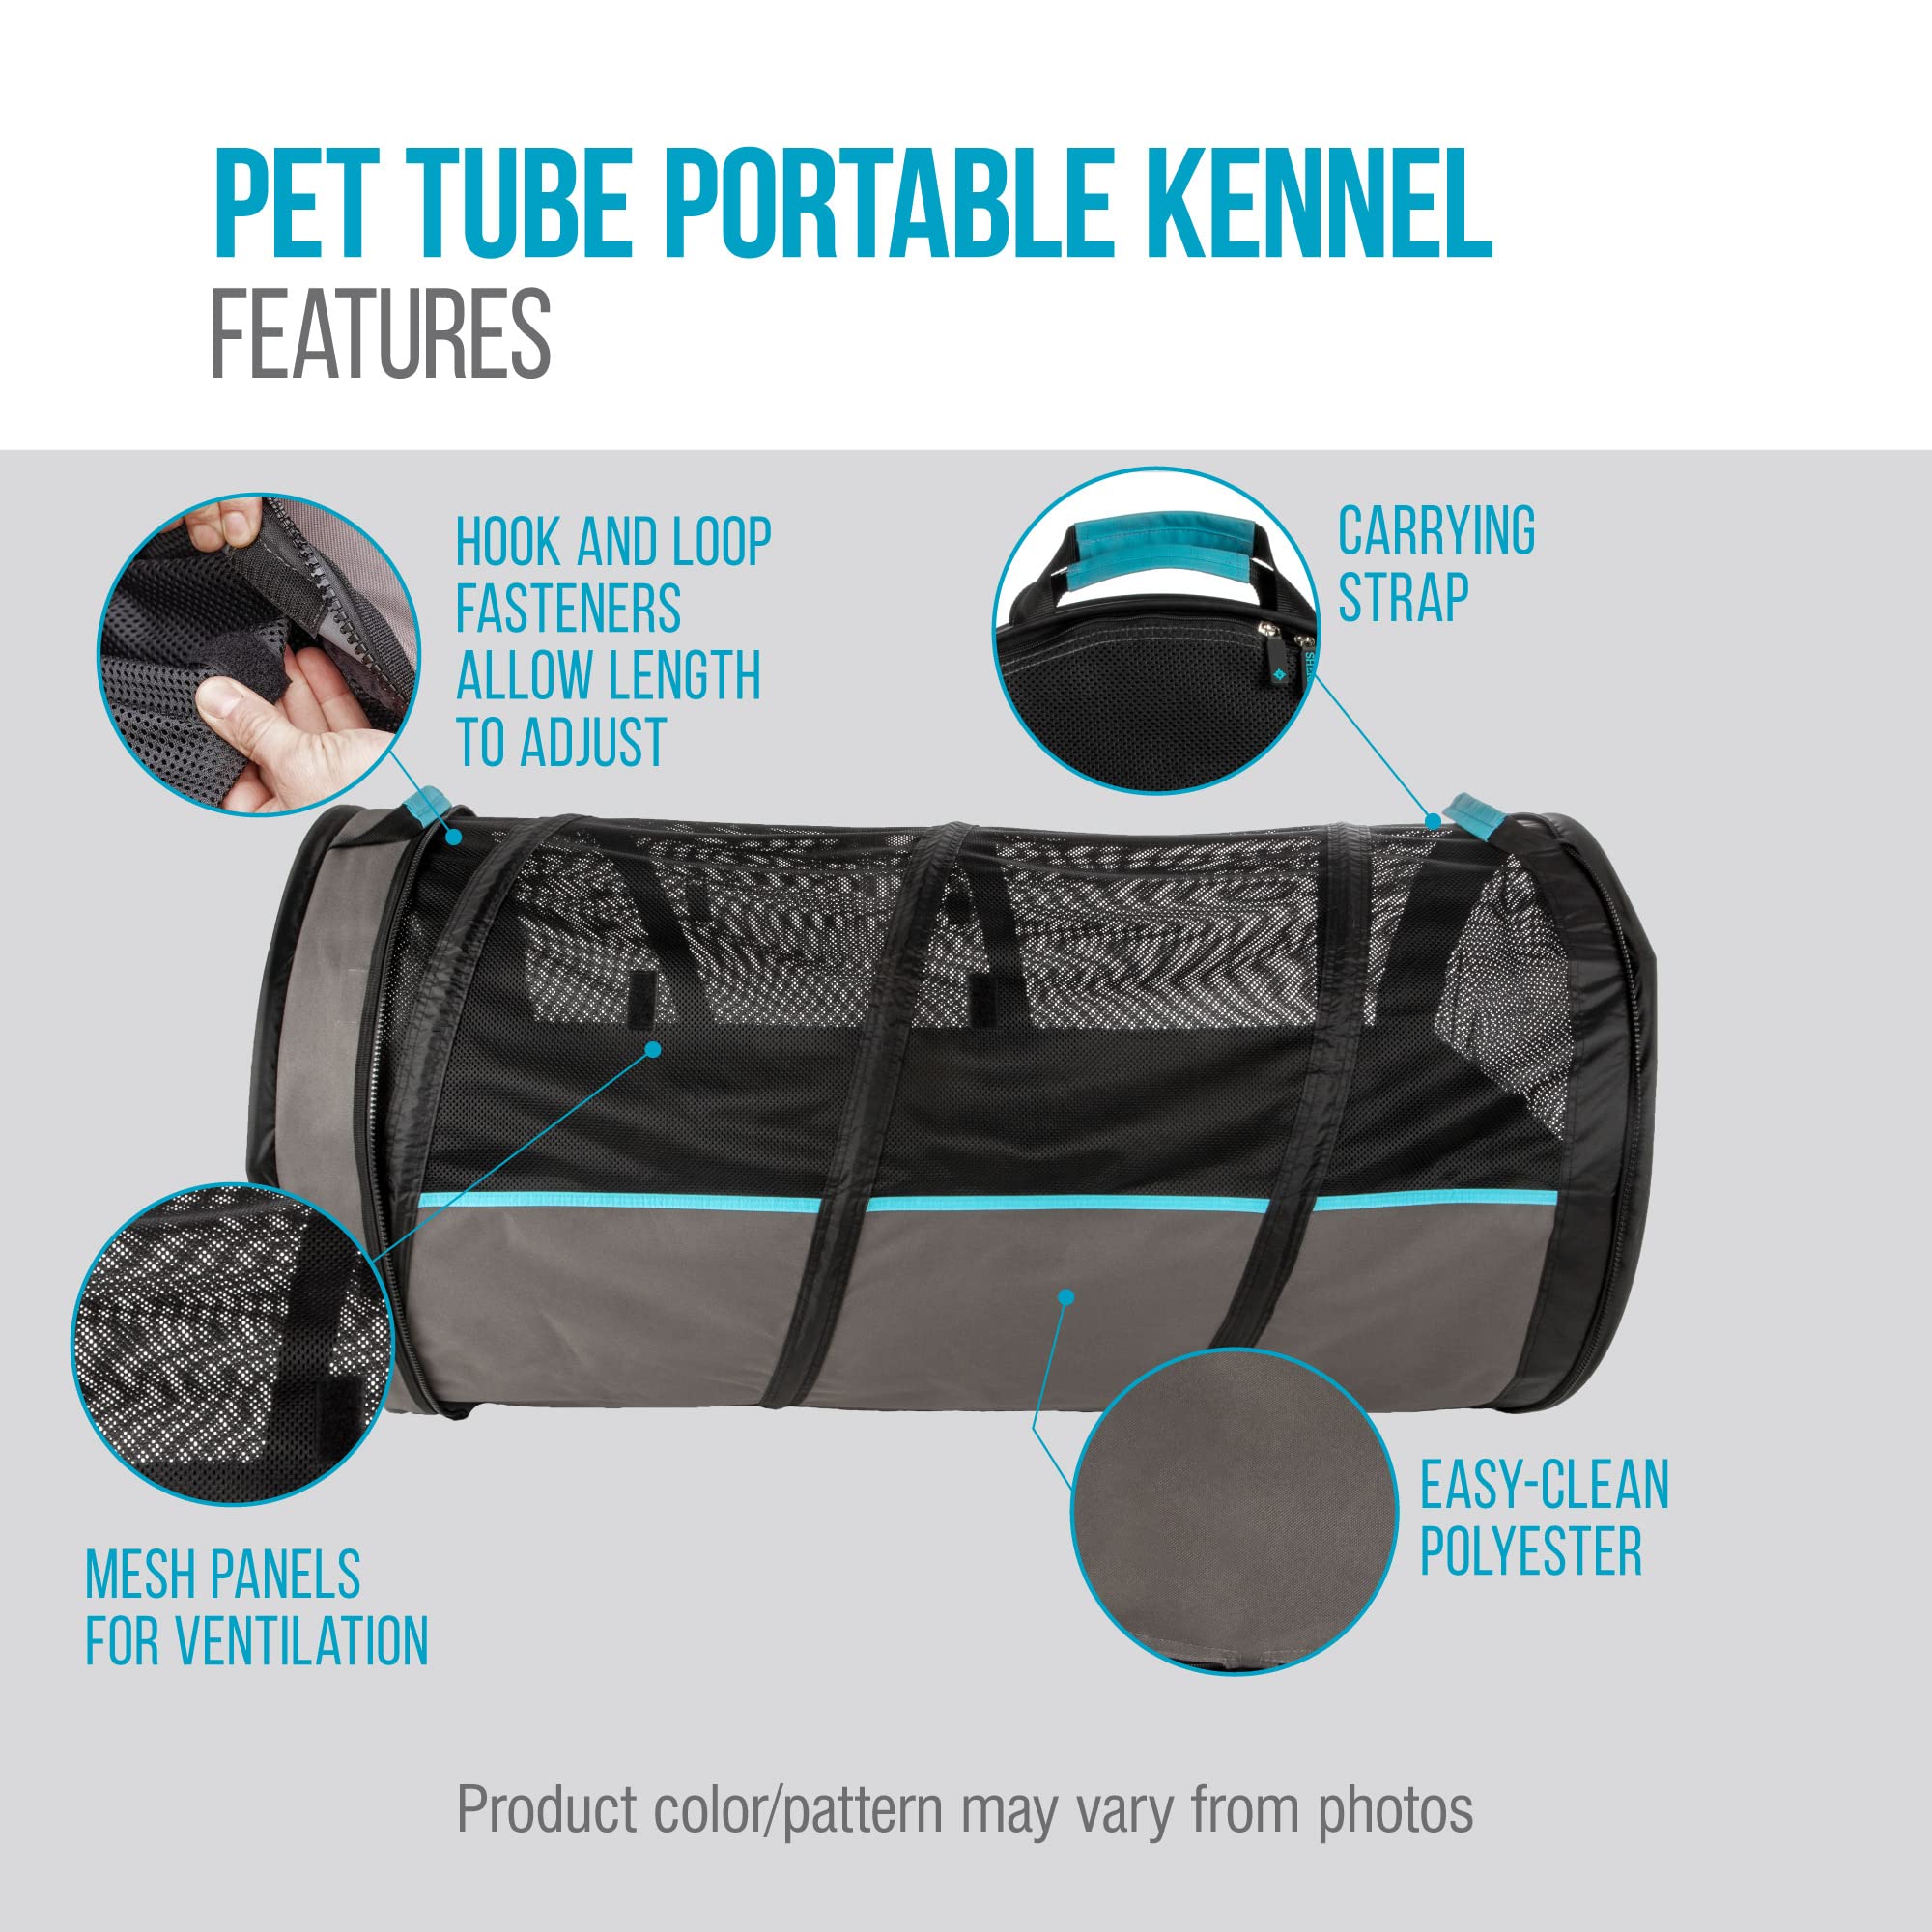 Sherpa Pet Tube Tunnel Pet Carrier, Soft-Sided Portable Popup Car Kennel for Dogs & Cats - Lightweight, Claw-Resistant Fabric, Mesh Panels, Washable - Black & Gray, One Size